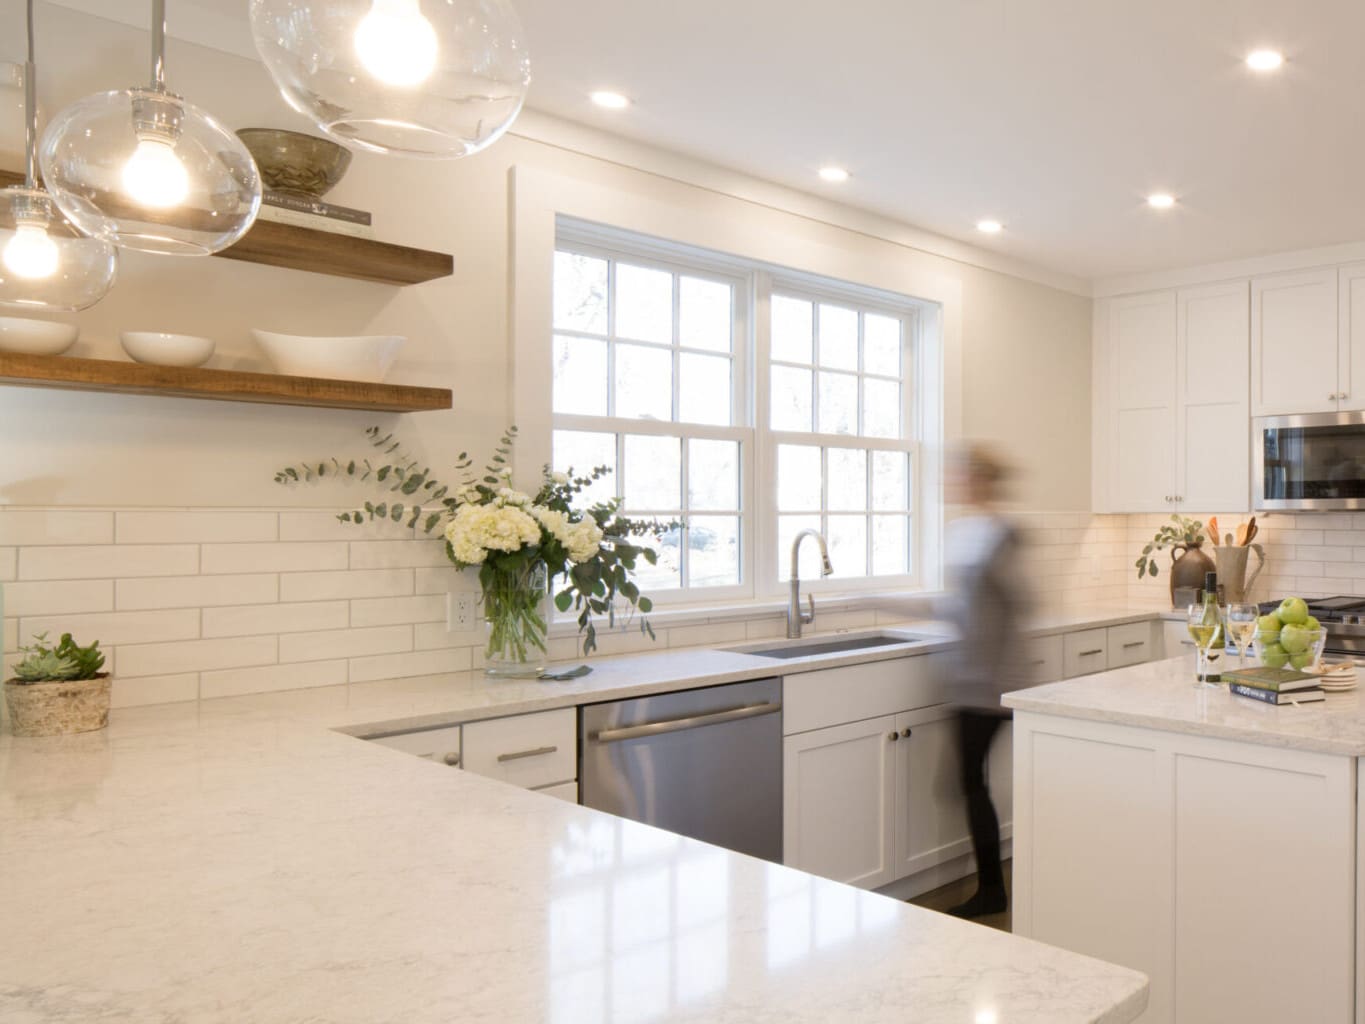 A photo of a kitchen with white painted shaker-style cabinets, stainless steel appliances, white subway tile backsplash, wooden shelves, and light grey marble countertops.